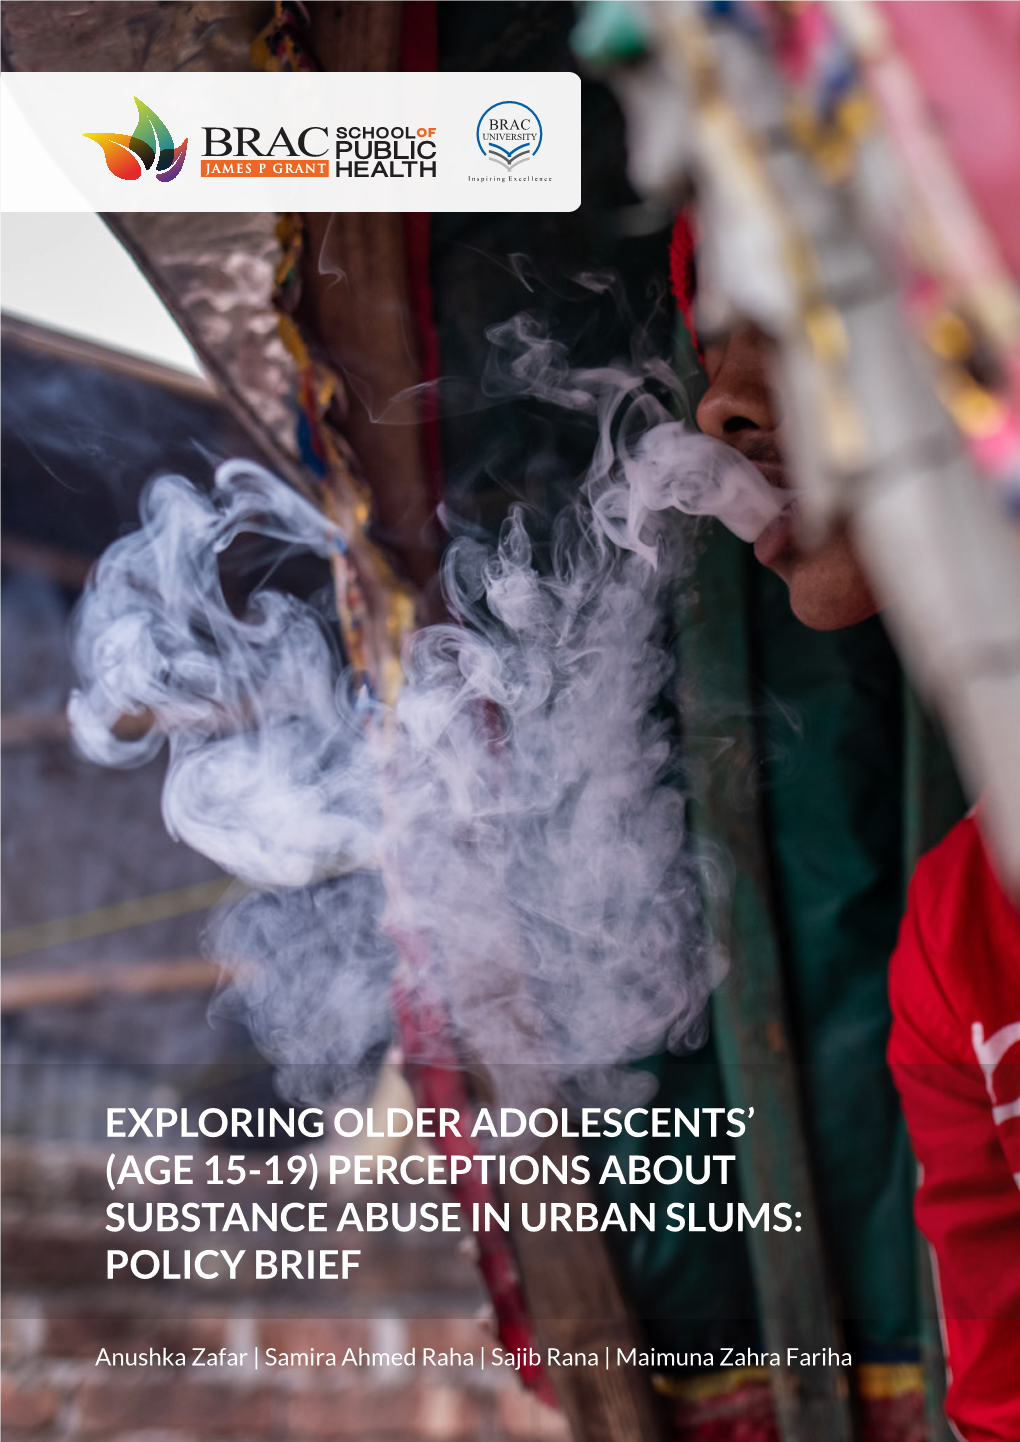 Perceptions About Substance Abuse in Urban Slums: Policy Brief